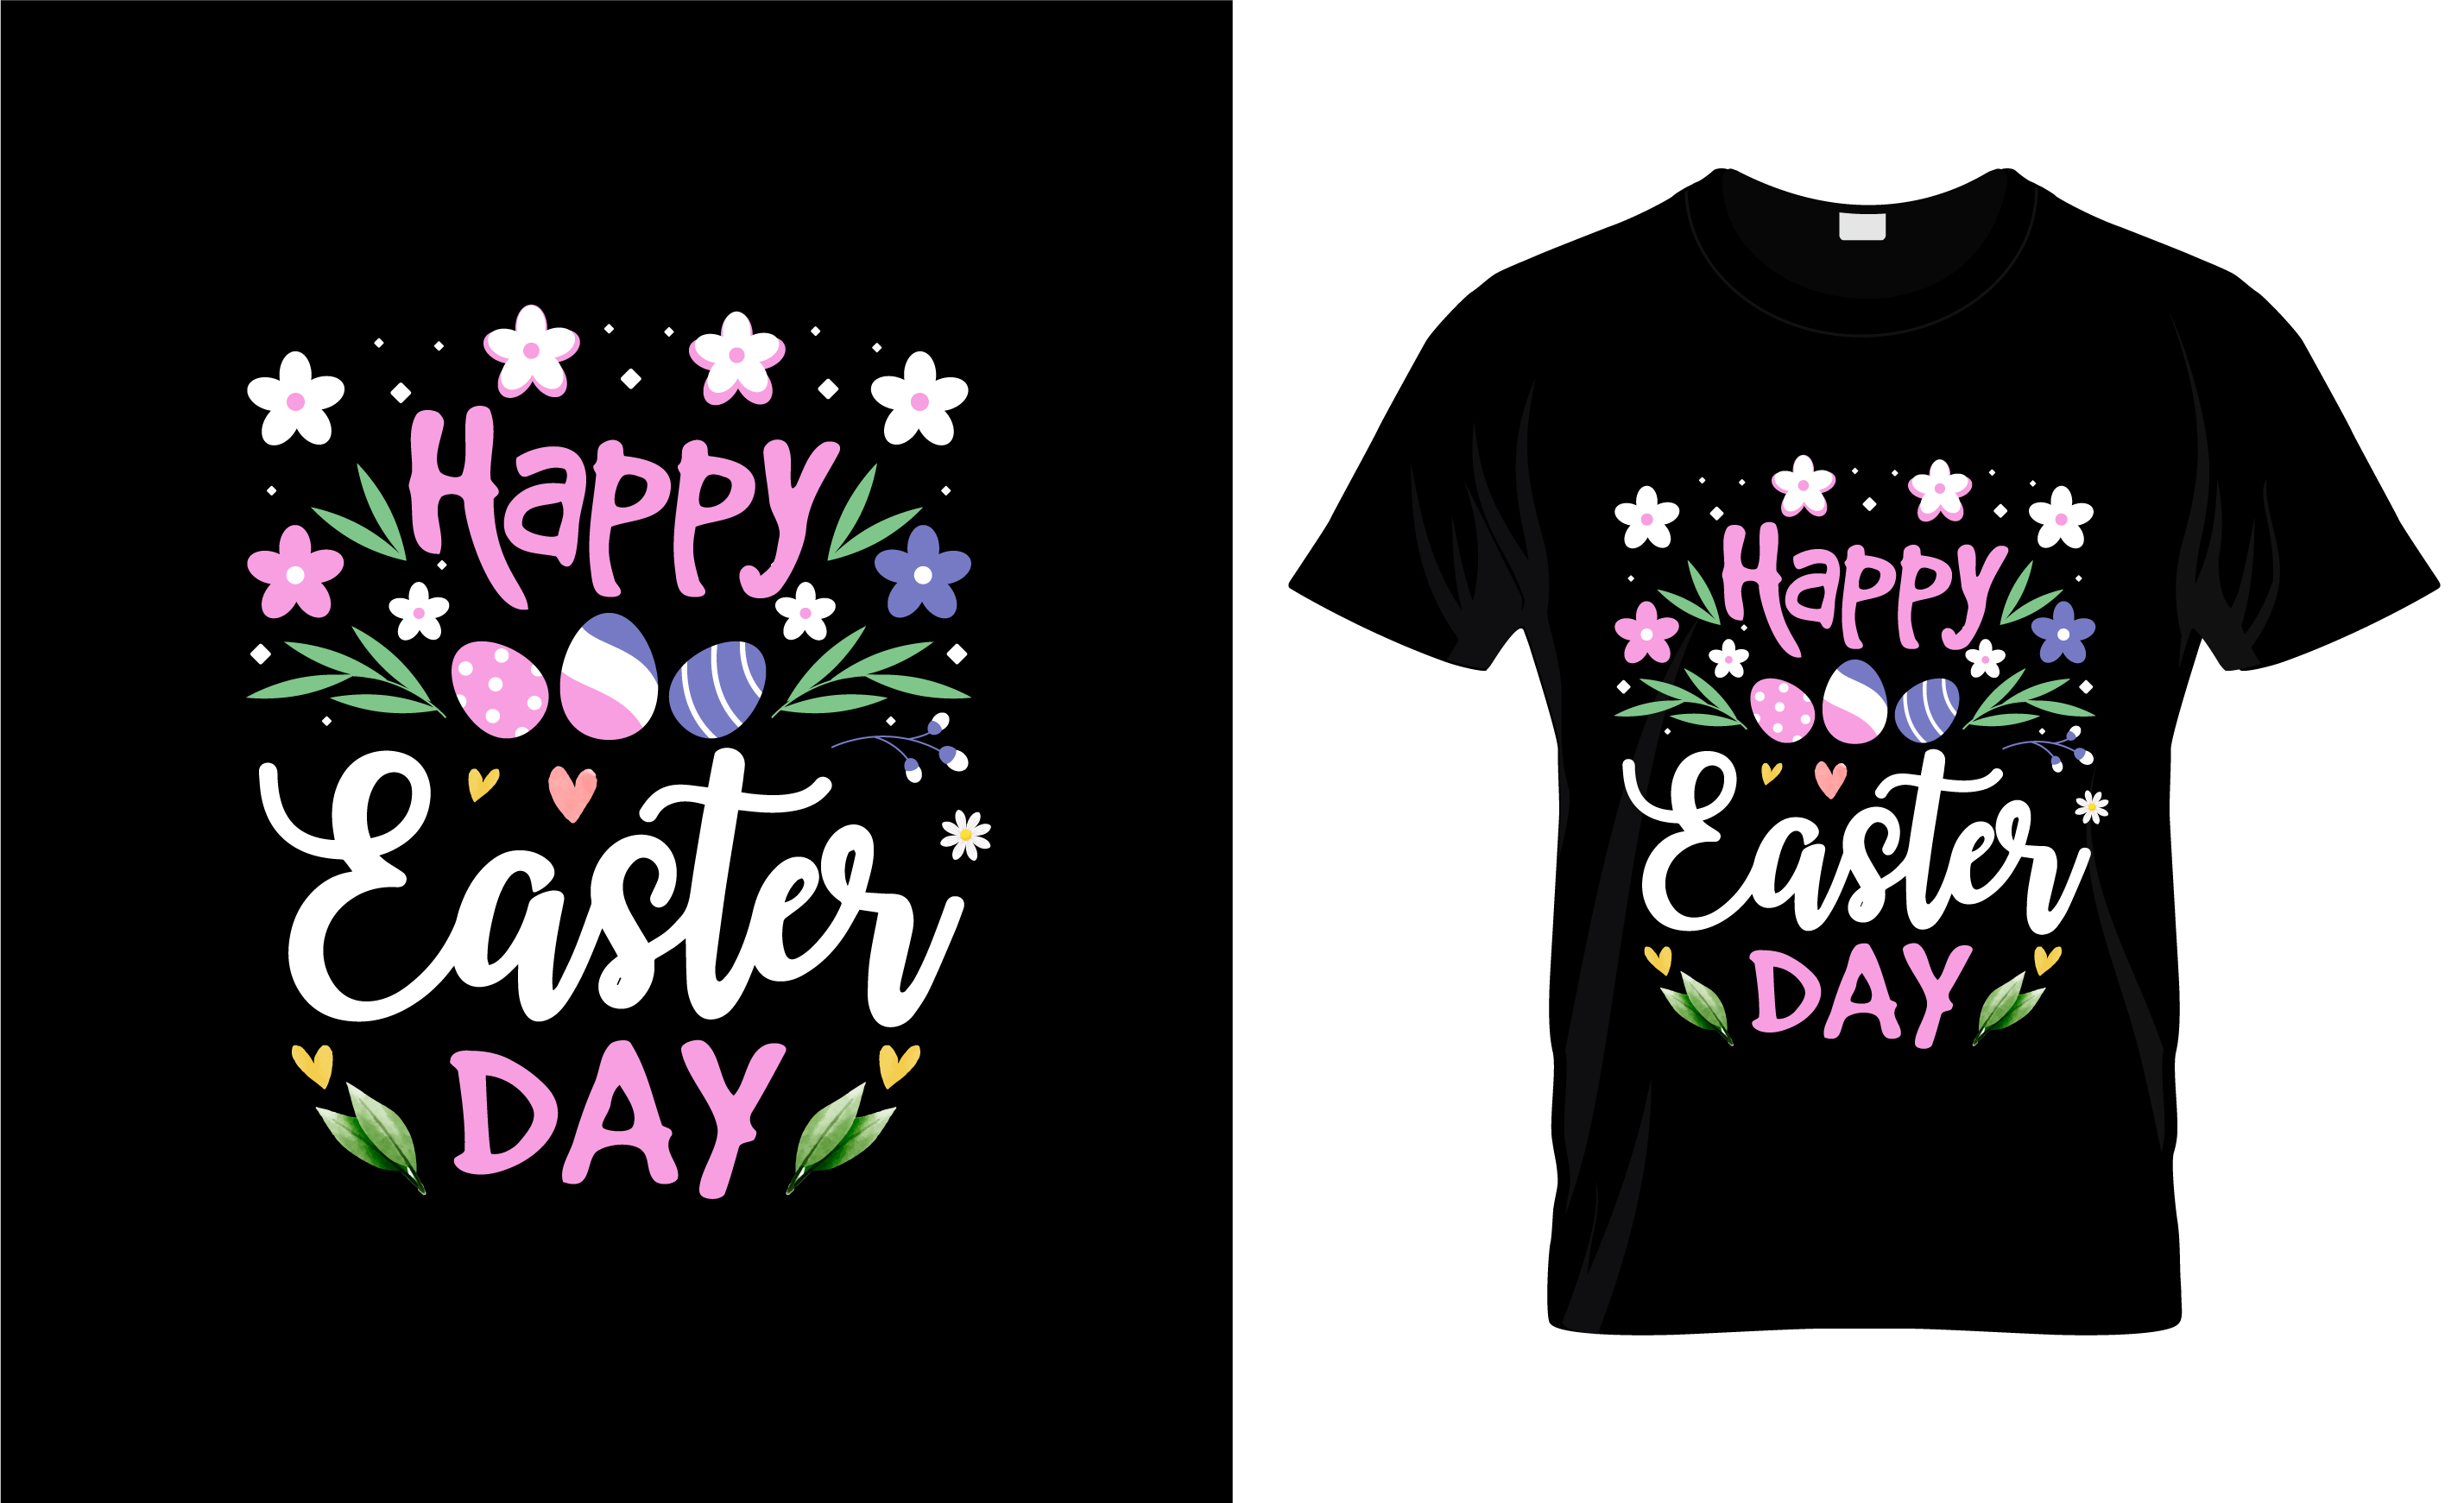 Image of a black t-shirt with a charming print on the theme of easter day.